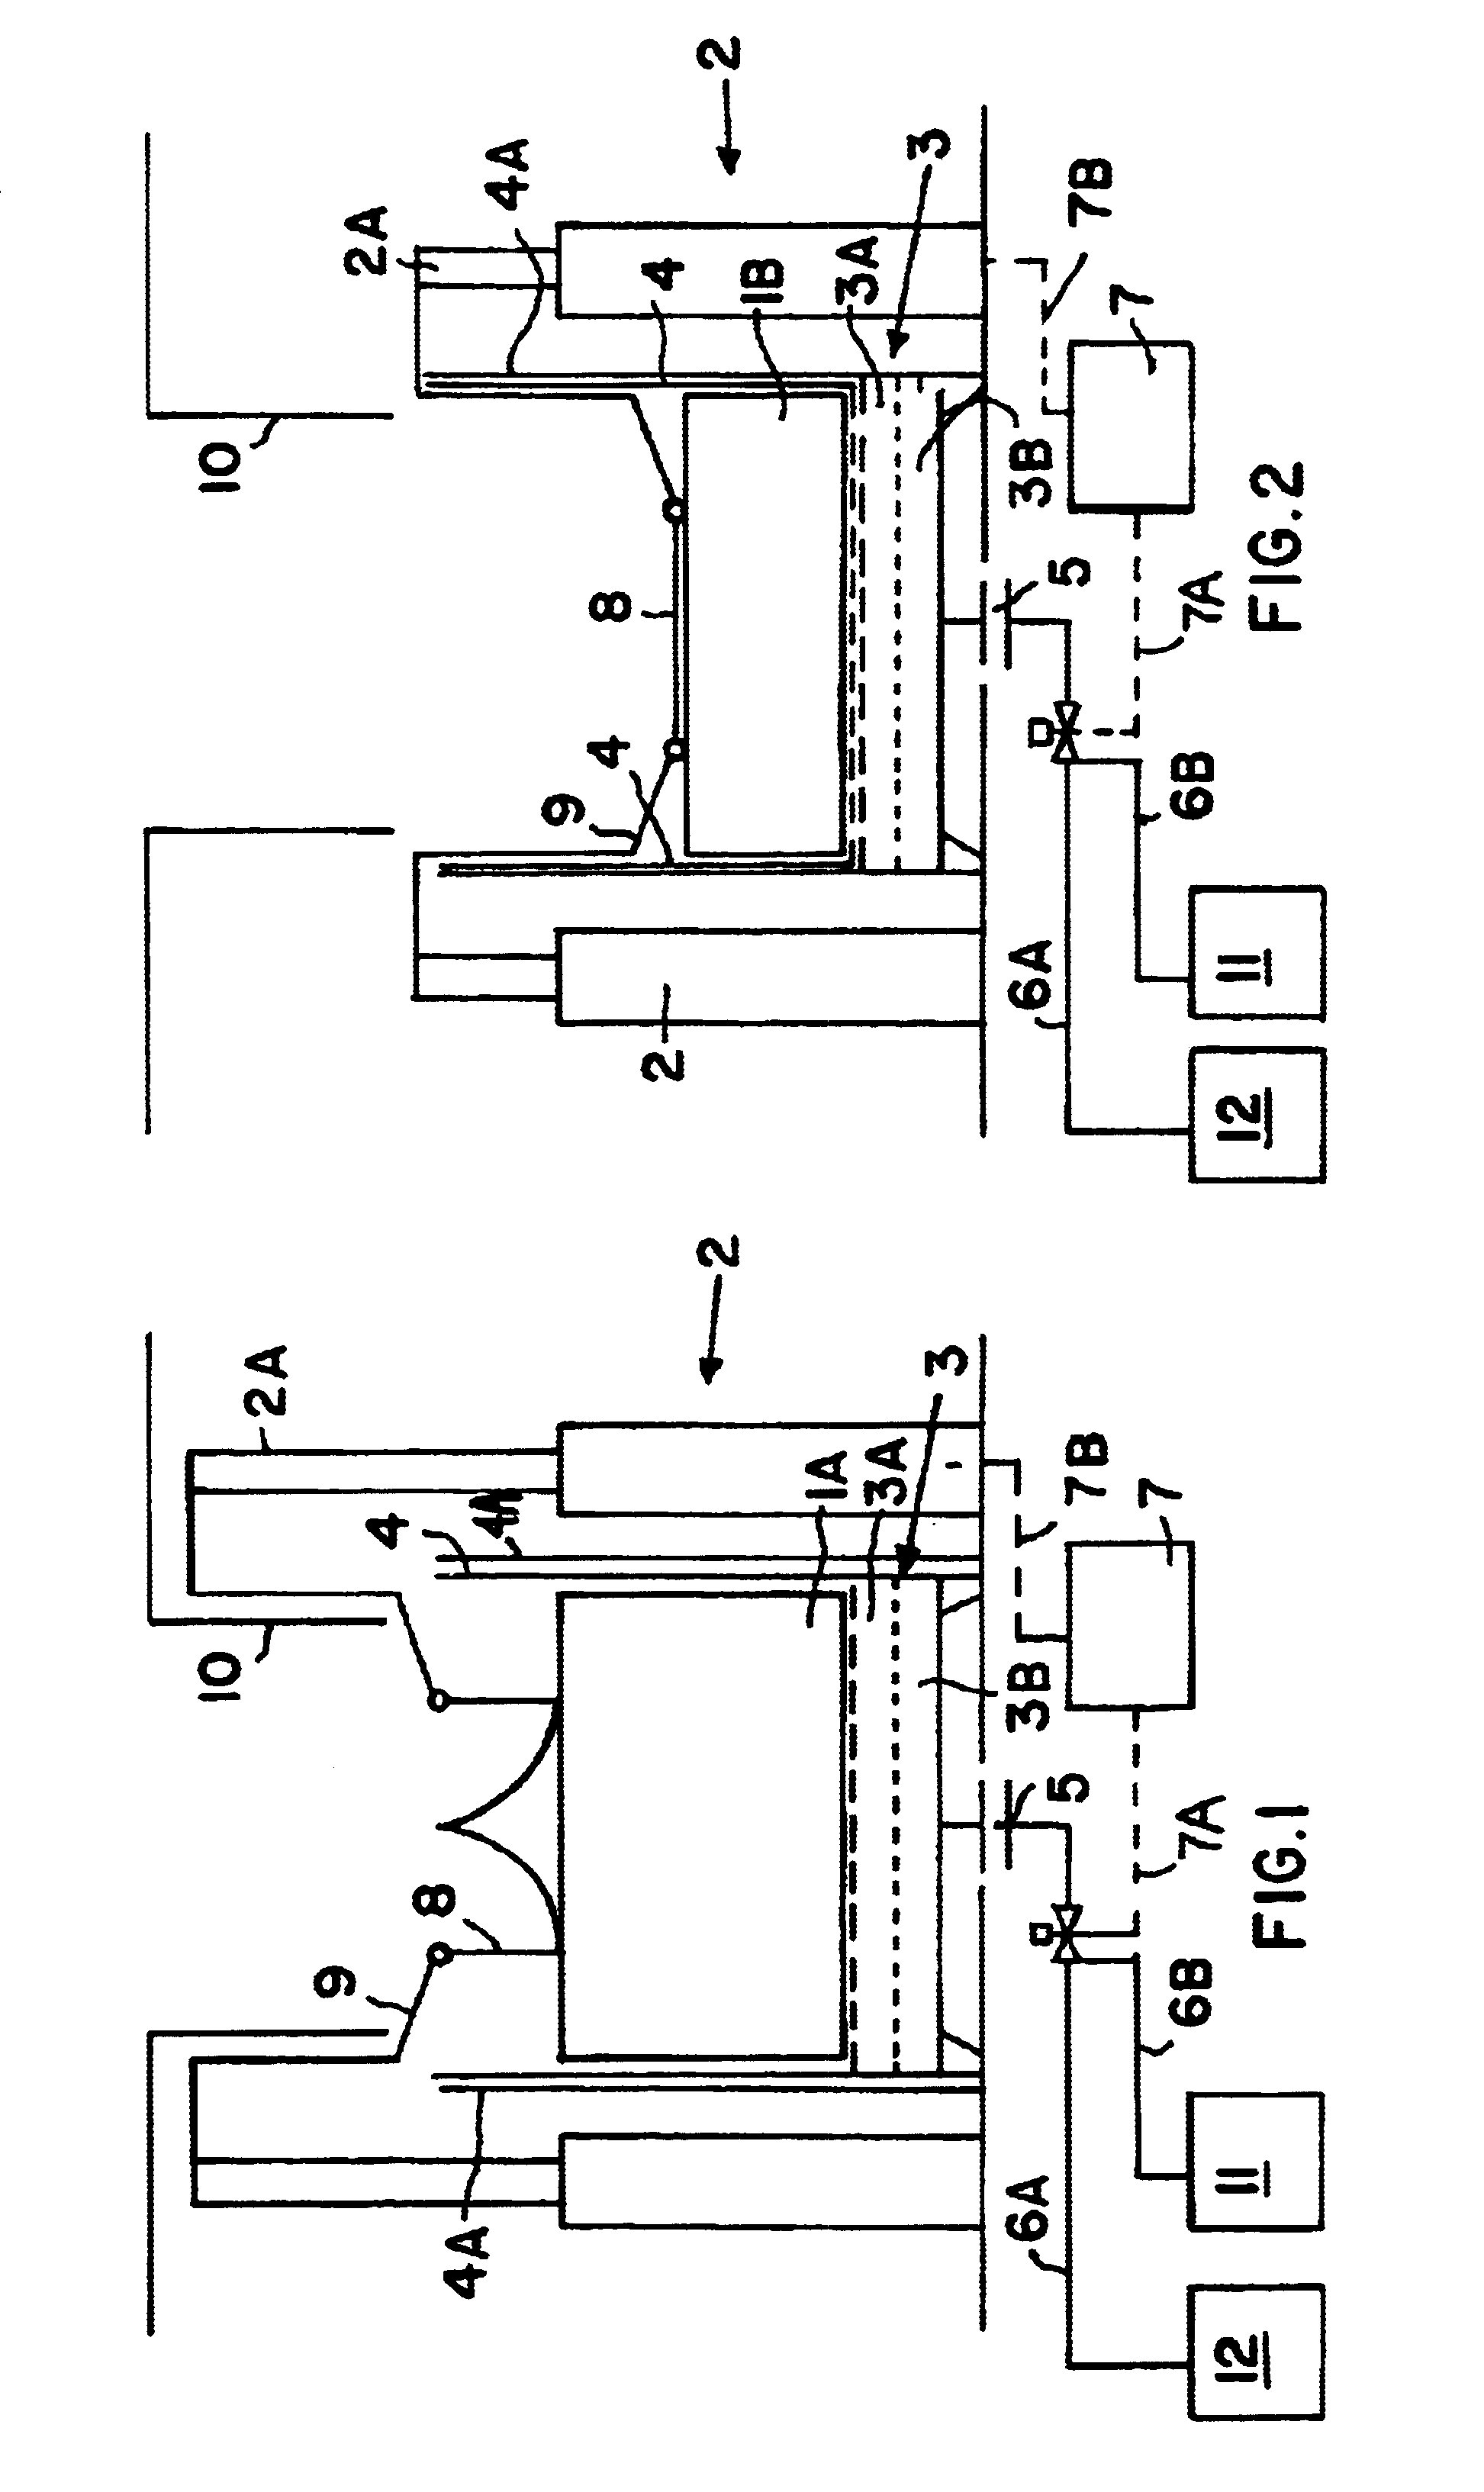 Apparatus for compacting and draining mixed waste in passenger transport vehicles